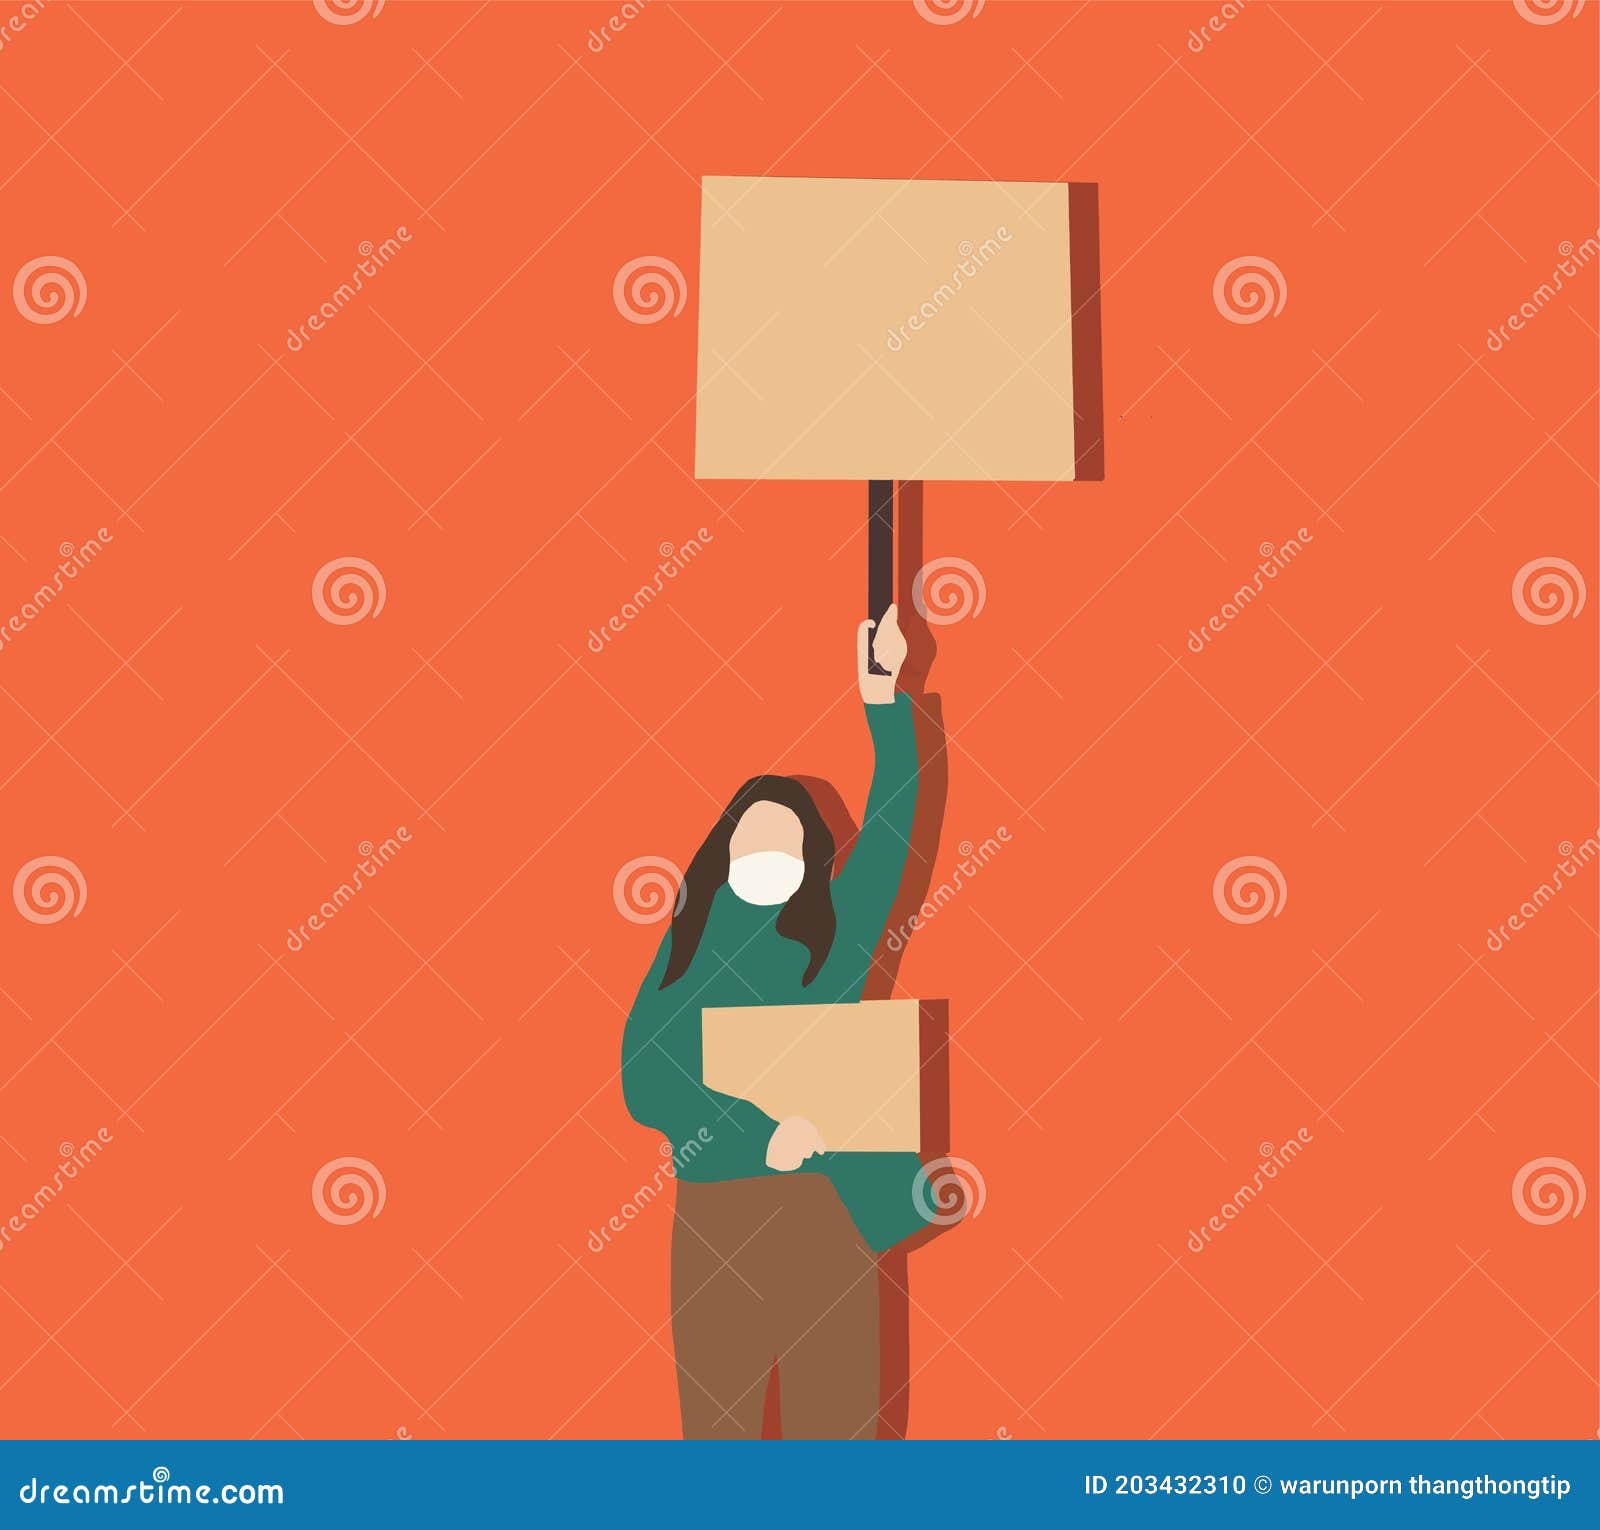 women standing and holding blank signs, banner and placards on a protest demostration or picket